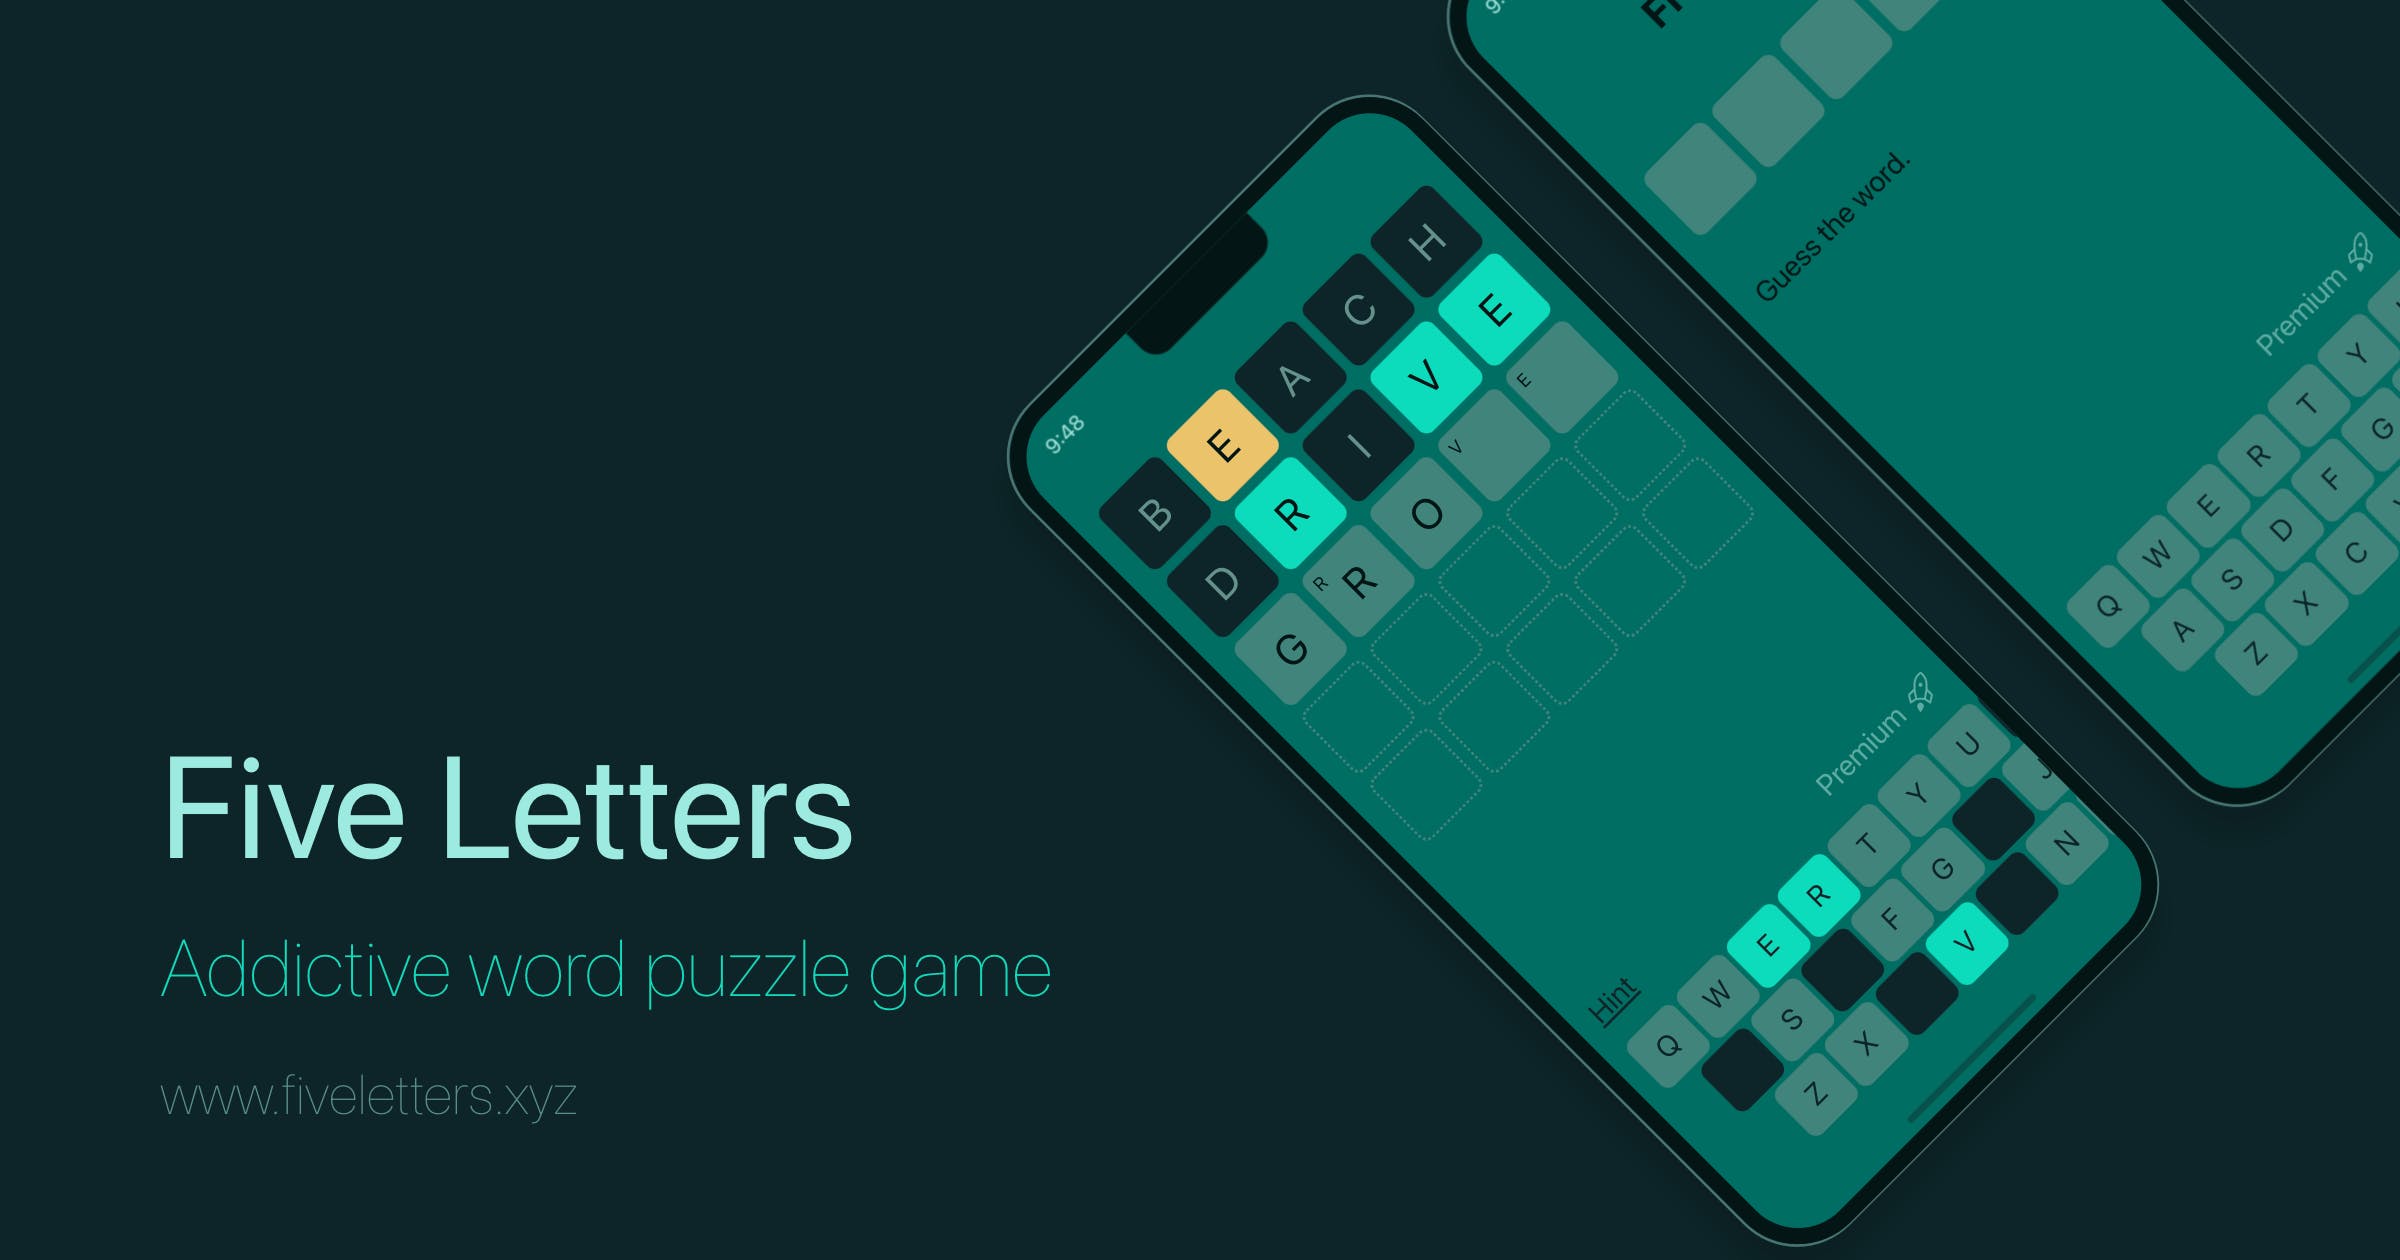 Five Letters Addictive word puzzle game | Product Hunt